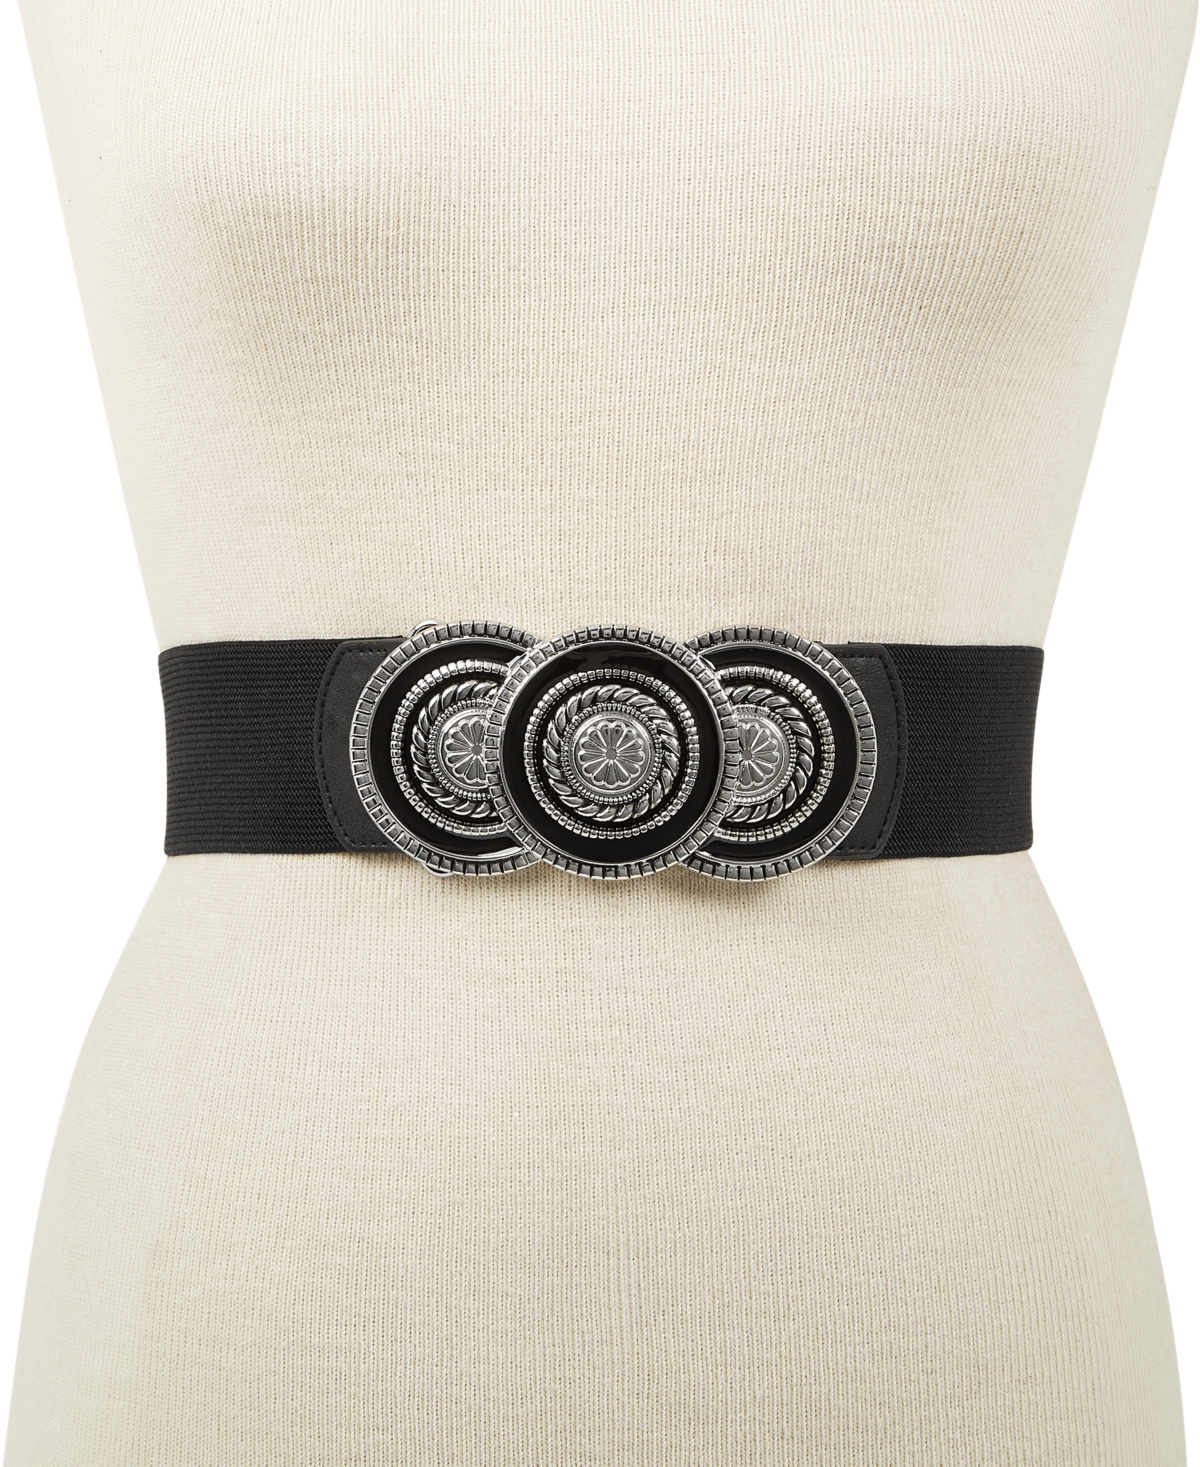 Inc International Concepts Round-buckle Stretch Belt, Created For Macy's In Black,silver